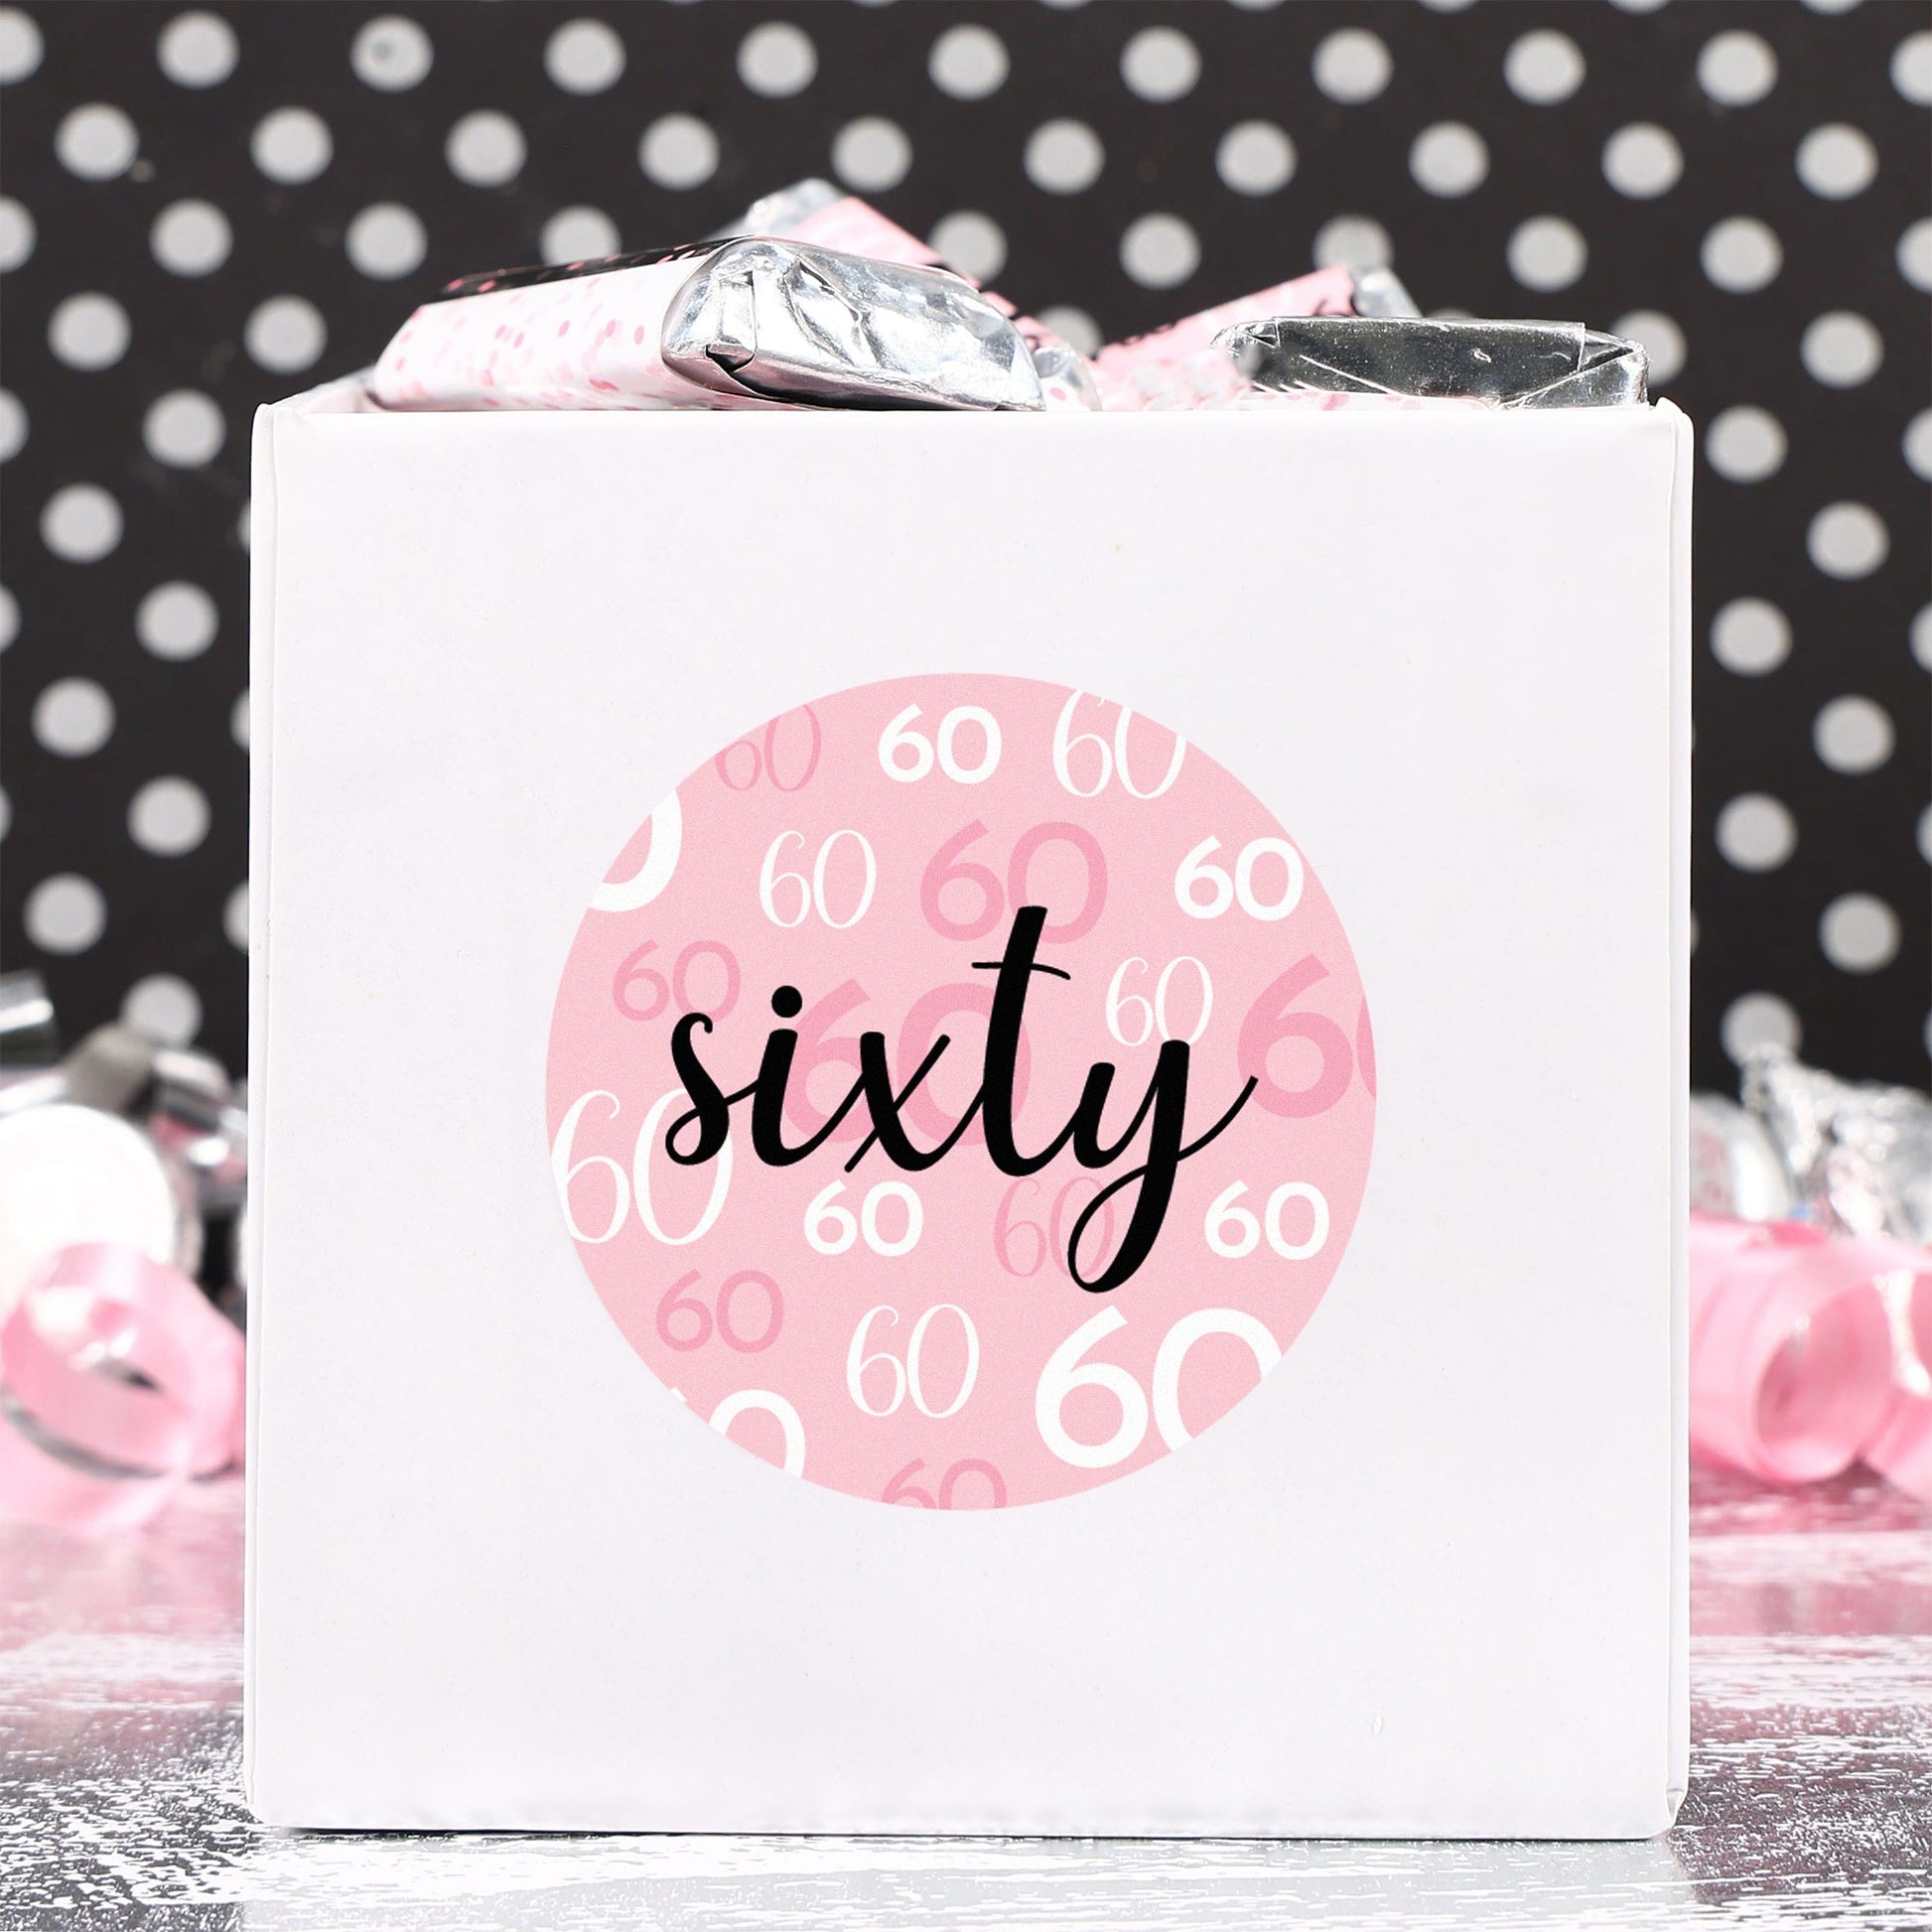 A close-up of a pink and black 60th birthday sticker with a stylish design, made in the USA and perfect for celebrating a milestone birthday.